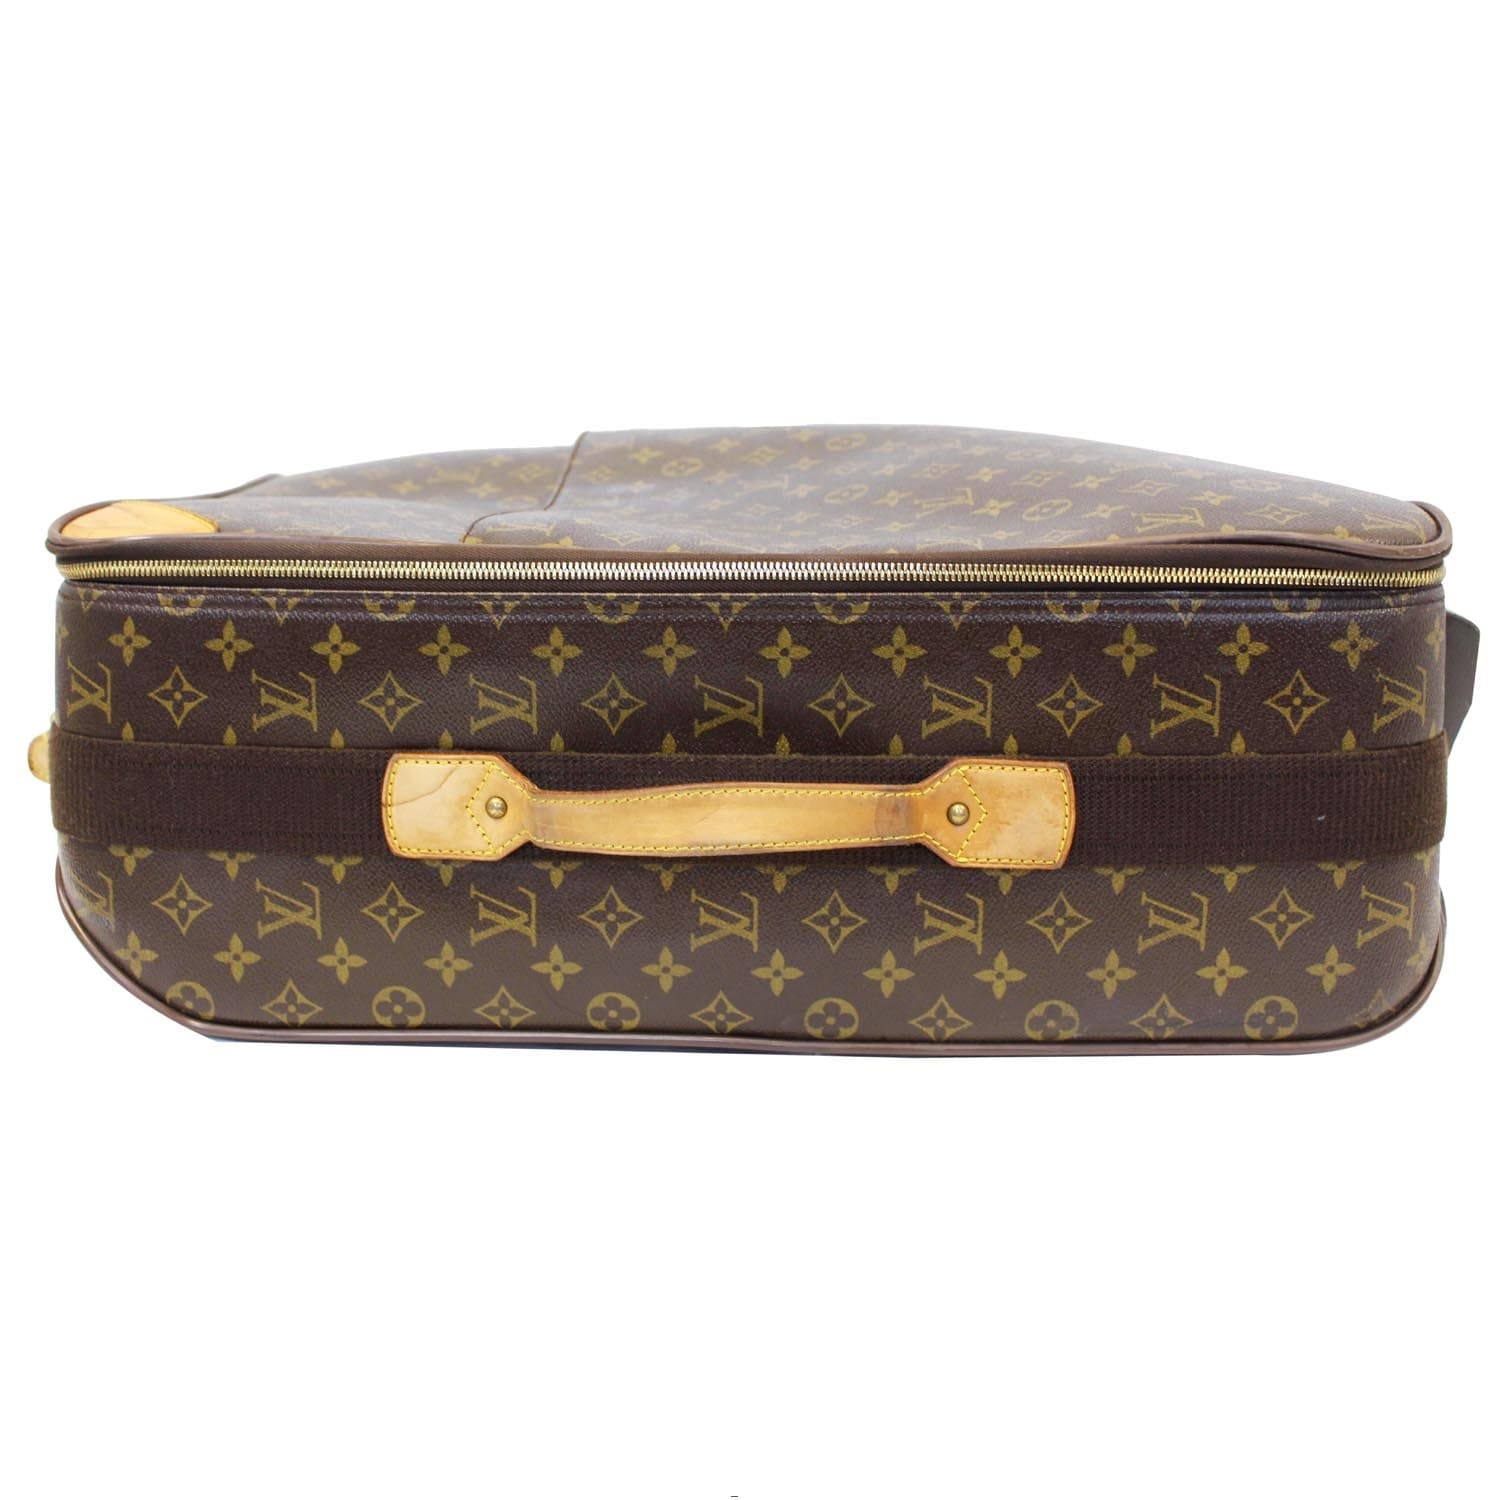 A Monogram Canvas Pégase 65 Suitcase with a Protective Cover